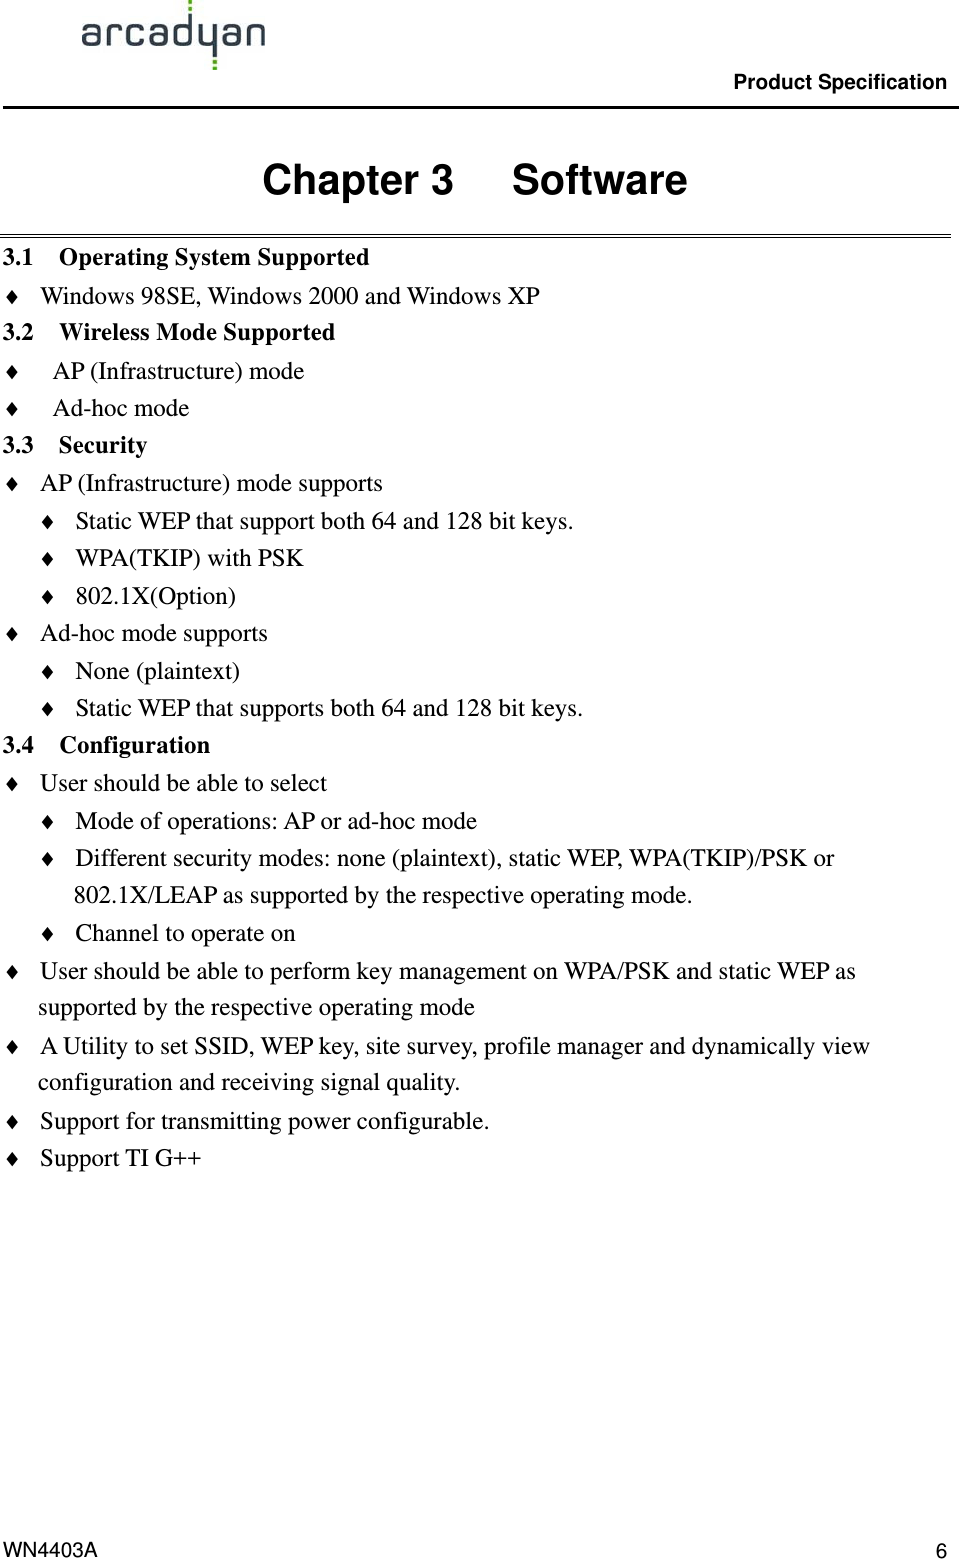                                                Product Specification                                              WN4403A  6Chapter 3   Software 3.1  Operating System Supported ♦ ♦ ♦ ♦ ♦ ♦ ♦ ♦ ♦ ♦ ♦ ♦ ♦ ♦ ♦ ♦ ♦ ♦ Windows 98SE, Windows 2000 and Windows XP   3.2  Wireless Mode Supported AP (Infrastructure) mode Ad-hoc mode 3.3  Security  AP (Infrastructure) mode supports Static WEP that support both 64 and 128 bit keys. WPA(TKIP) with PSK 802.1X(Option) Ad-hoc mode supports None (plaintext) Static WEP that supports both 64 and 128 bit keys. 3.4  Configuration User should be able to select   Mode of operations: AP or ad-hoc mode Different security modes: none (plaintext), static WEP, WPA(TKIP)/PSK or 802.1X/LEAP as supported by the respective operating mode. Channel to operate on User should be able to perform key management on WPA/PSK and static WEP as supported by the respective operating mode A Utility to set SSID, WEP key, site survey, profile manager and dynamically view configuration and receiving signal quality. Support for transmitting power configurable. Support TI G++   